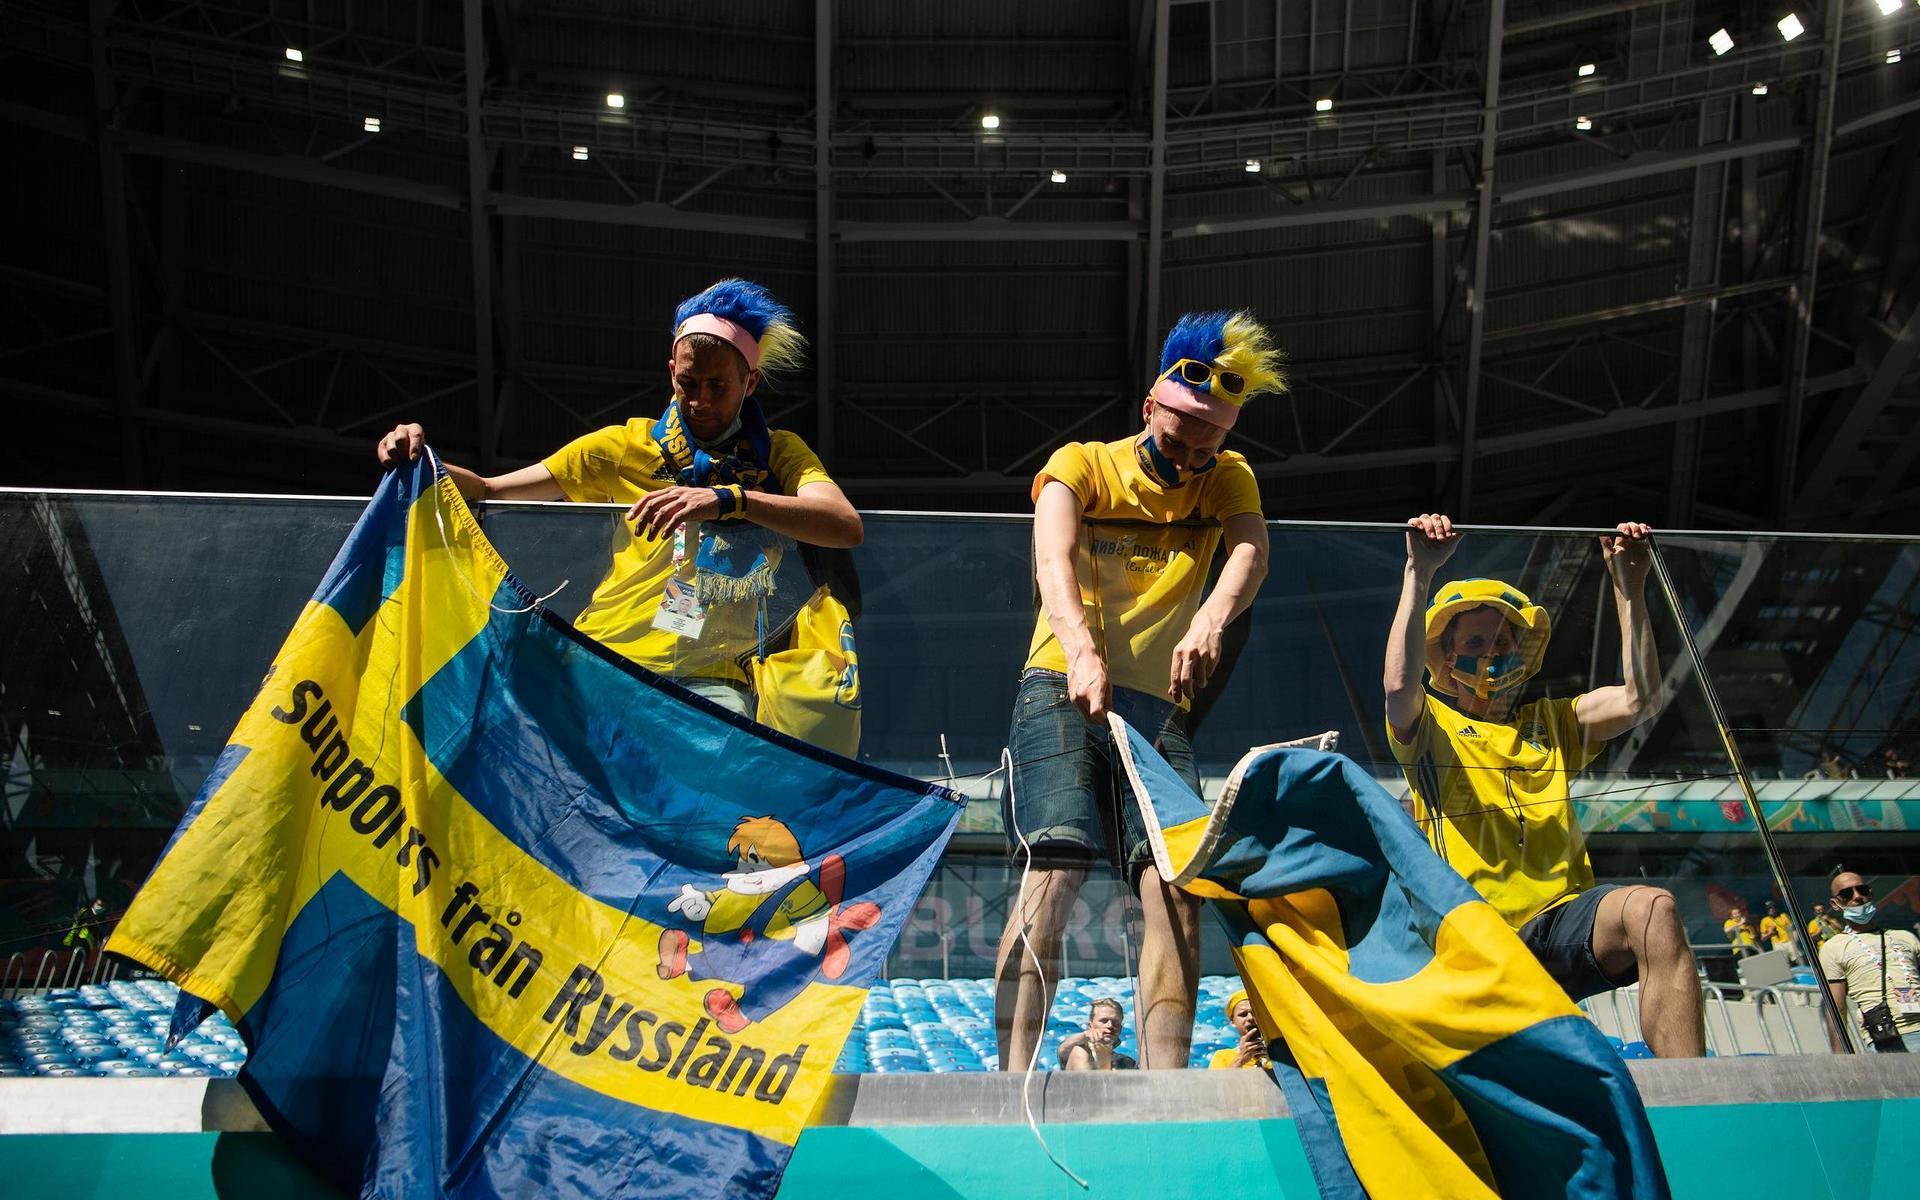 Swedish fans ahead of the UEFA Euro 2020 Football Championship match between Sweden and Slovakia on June 18, 2021 in Saint Petersburg.